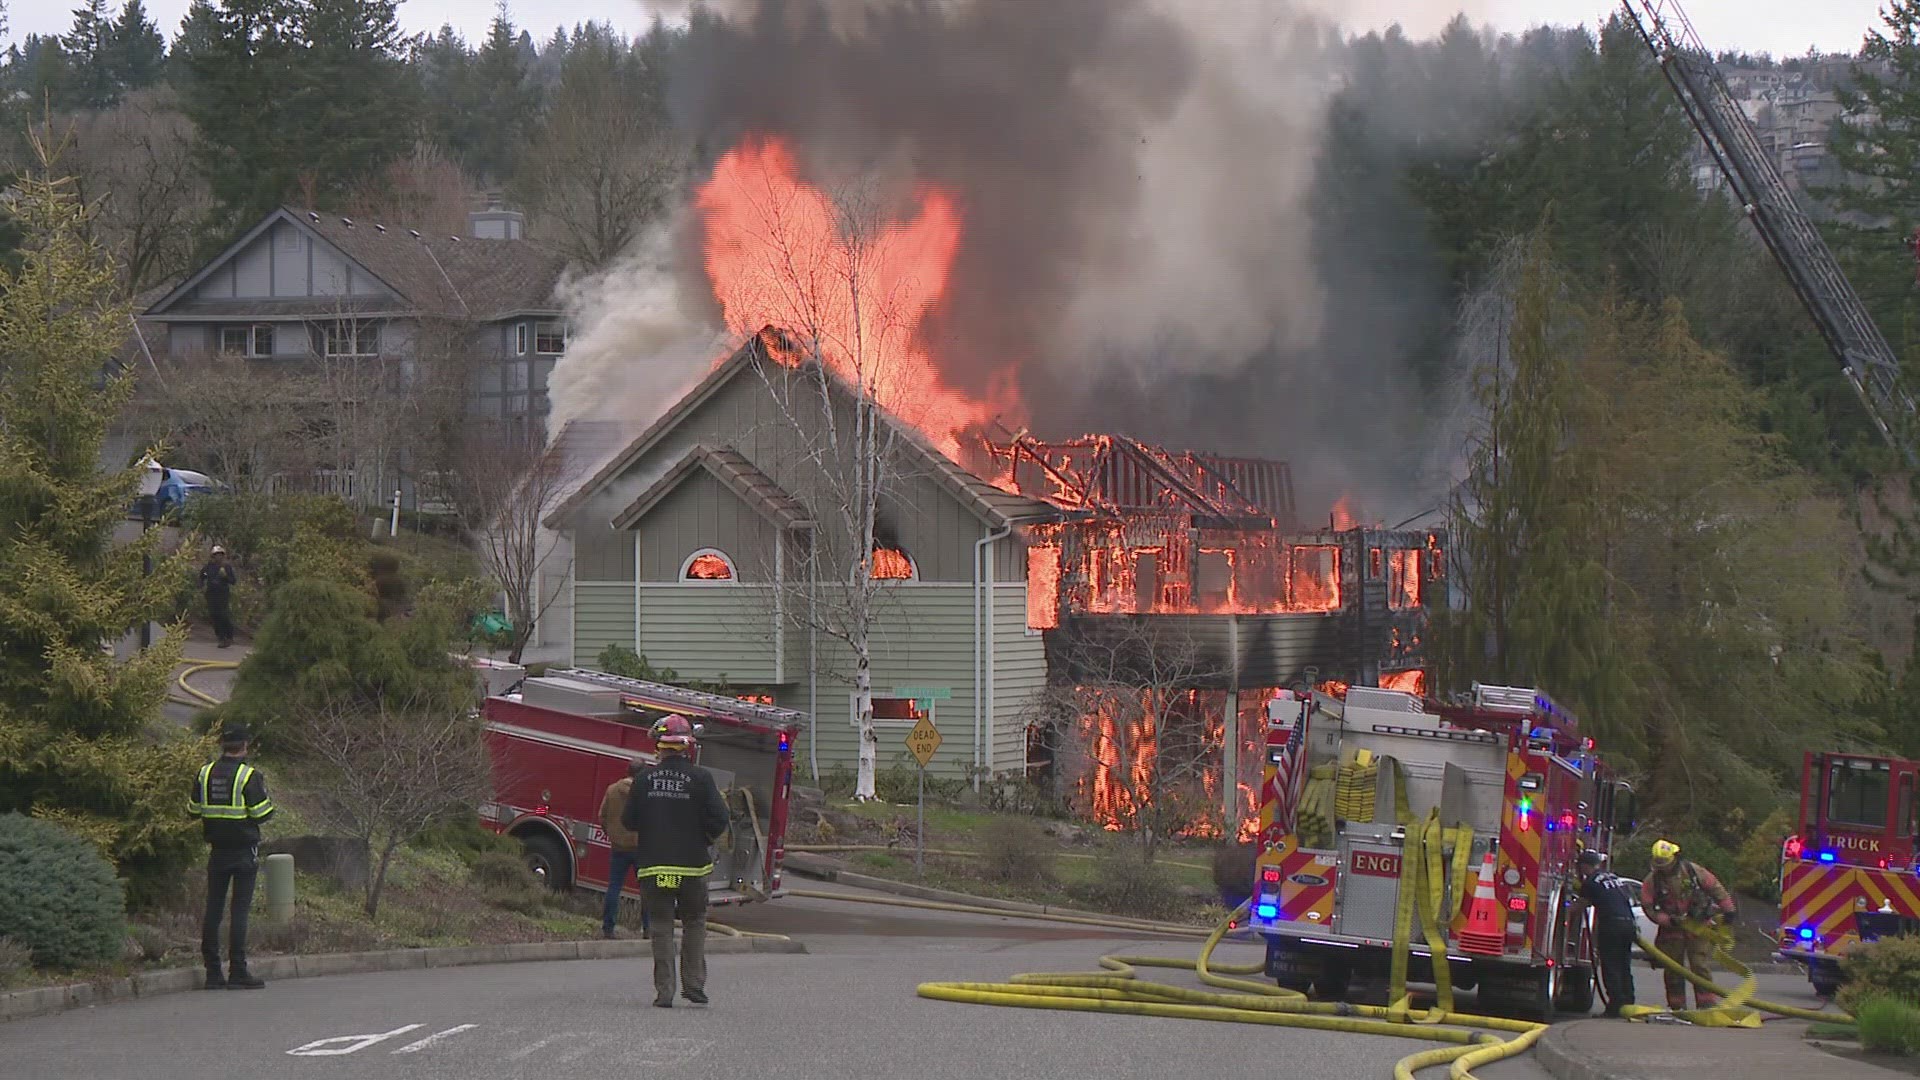 Portland Fire said they were responding to two homes on fire in the Northwest Heights neighborhood. Smoke and large flames could be seen coming from one home.